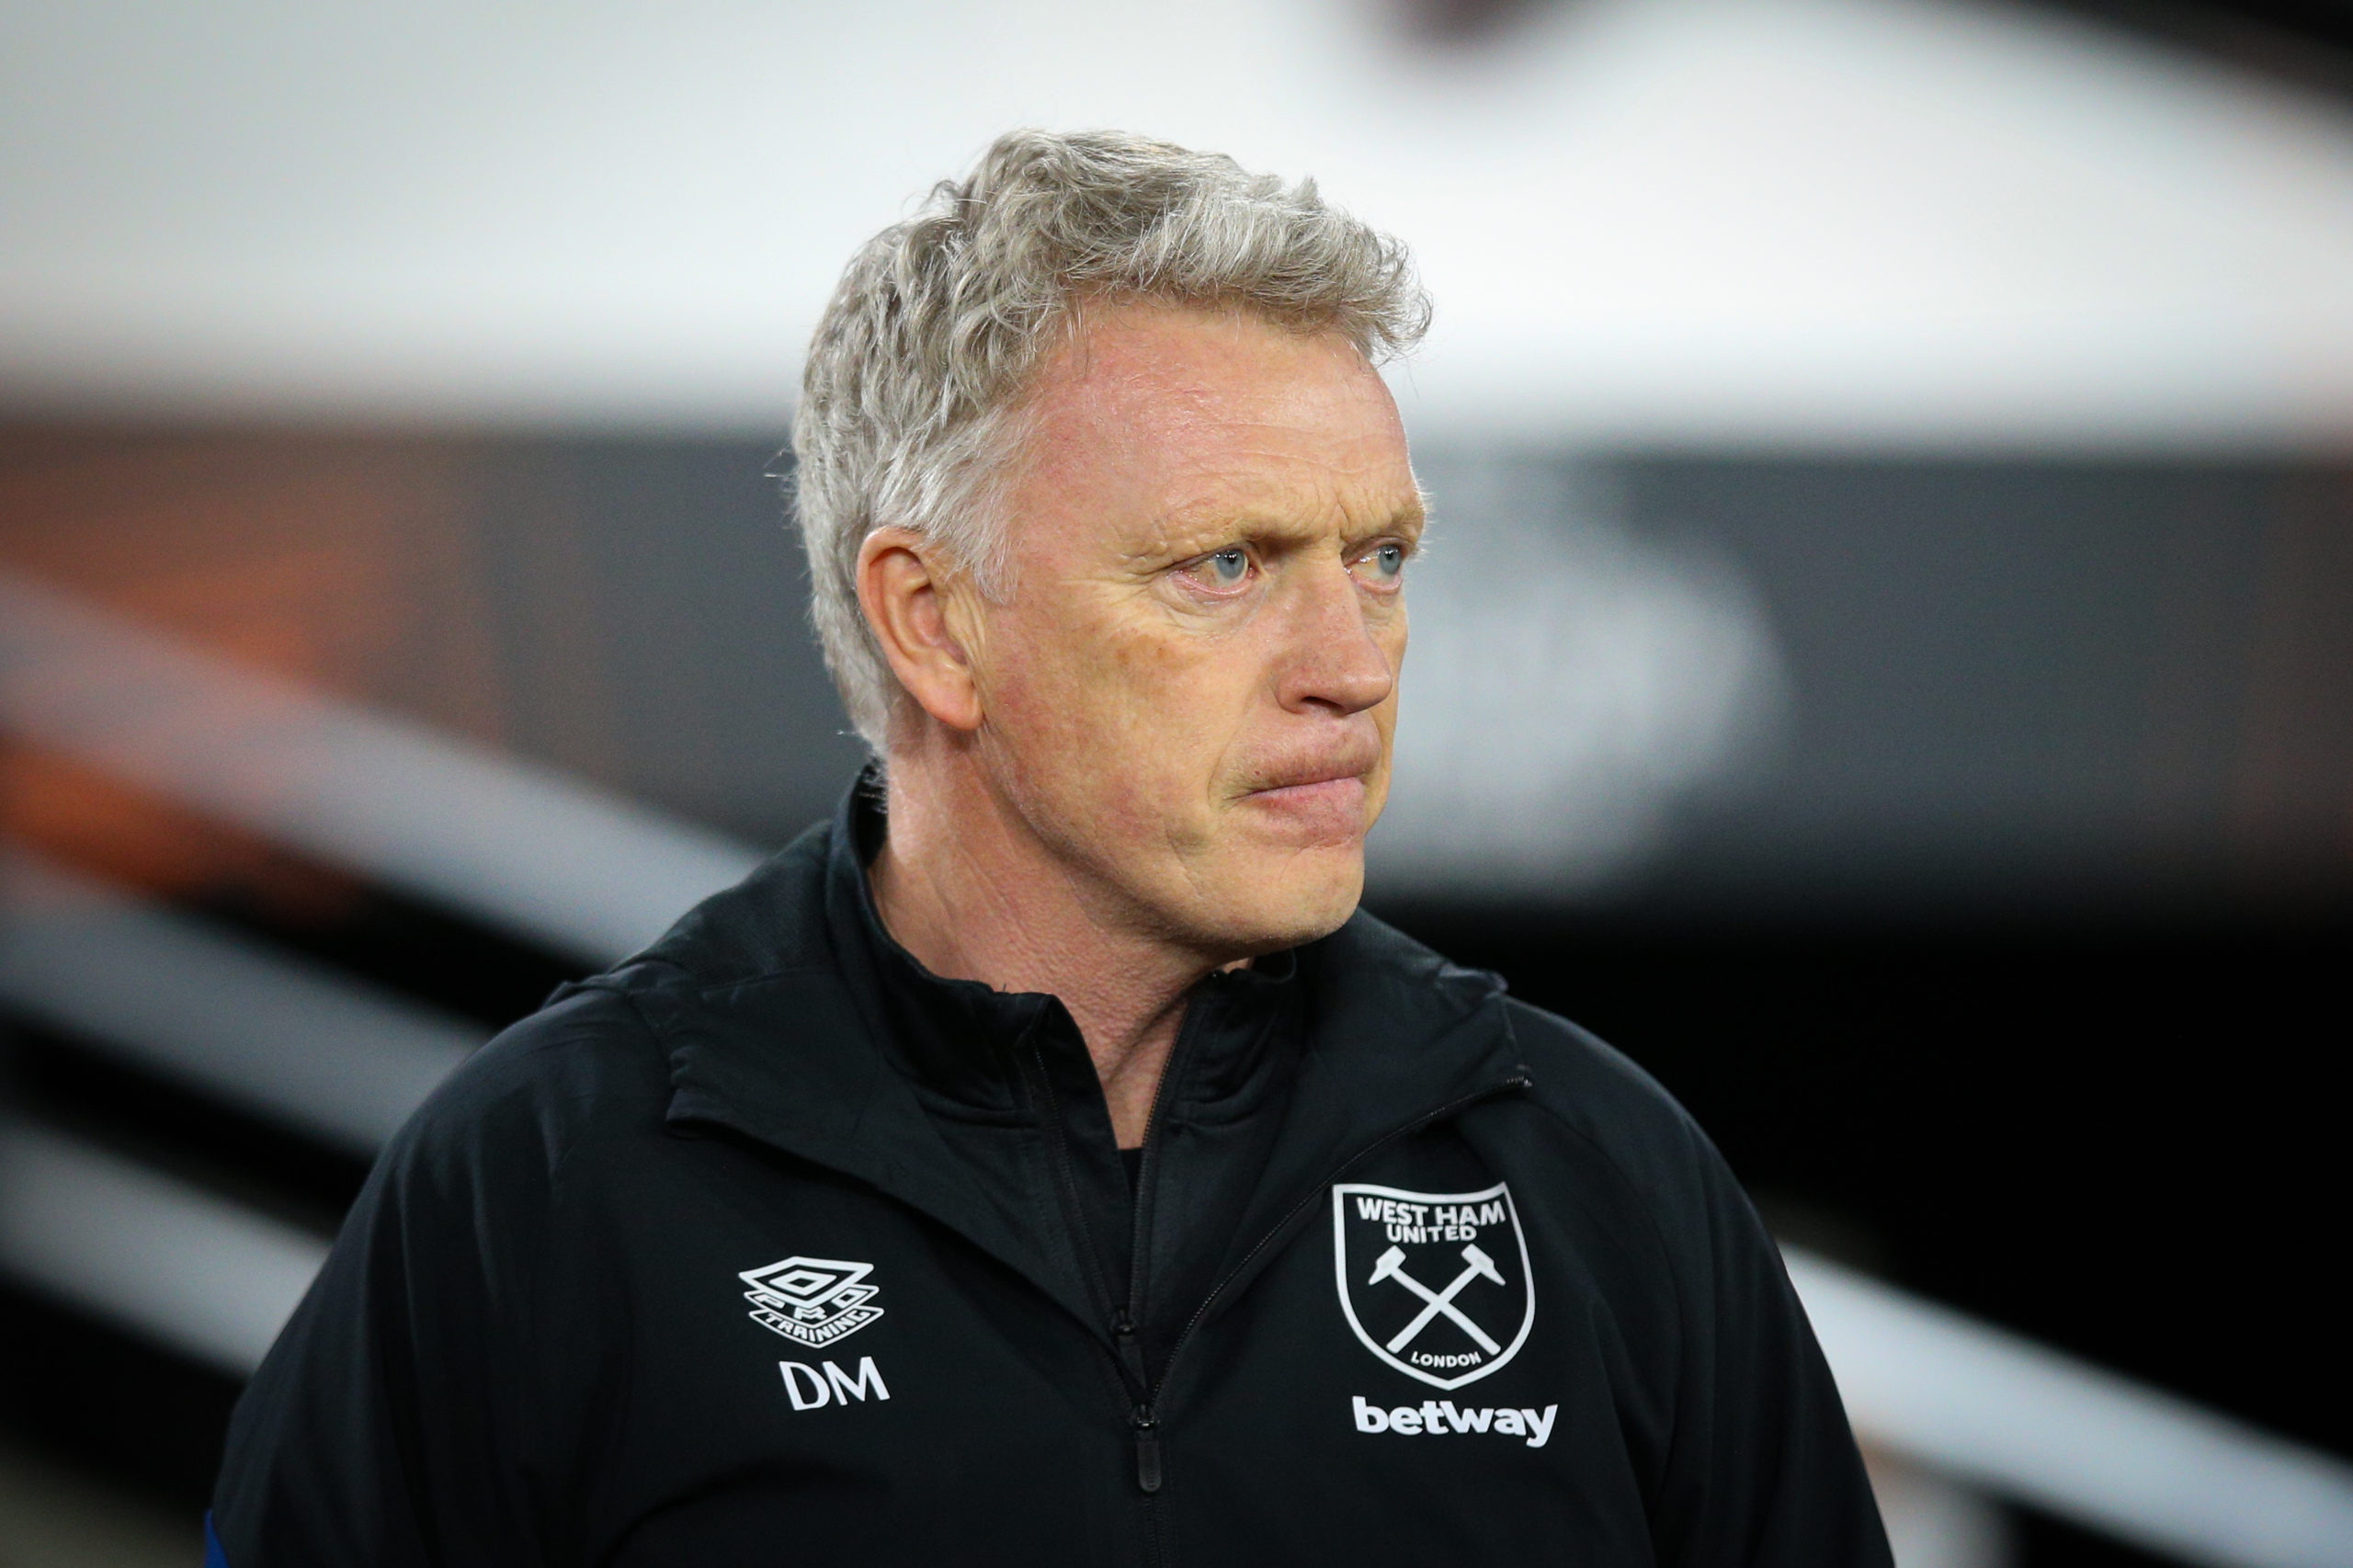 Forget Liverpool because ex West Ham man David Moyes didn't rate now surely looks destined for Man United